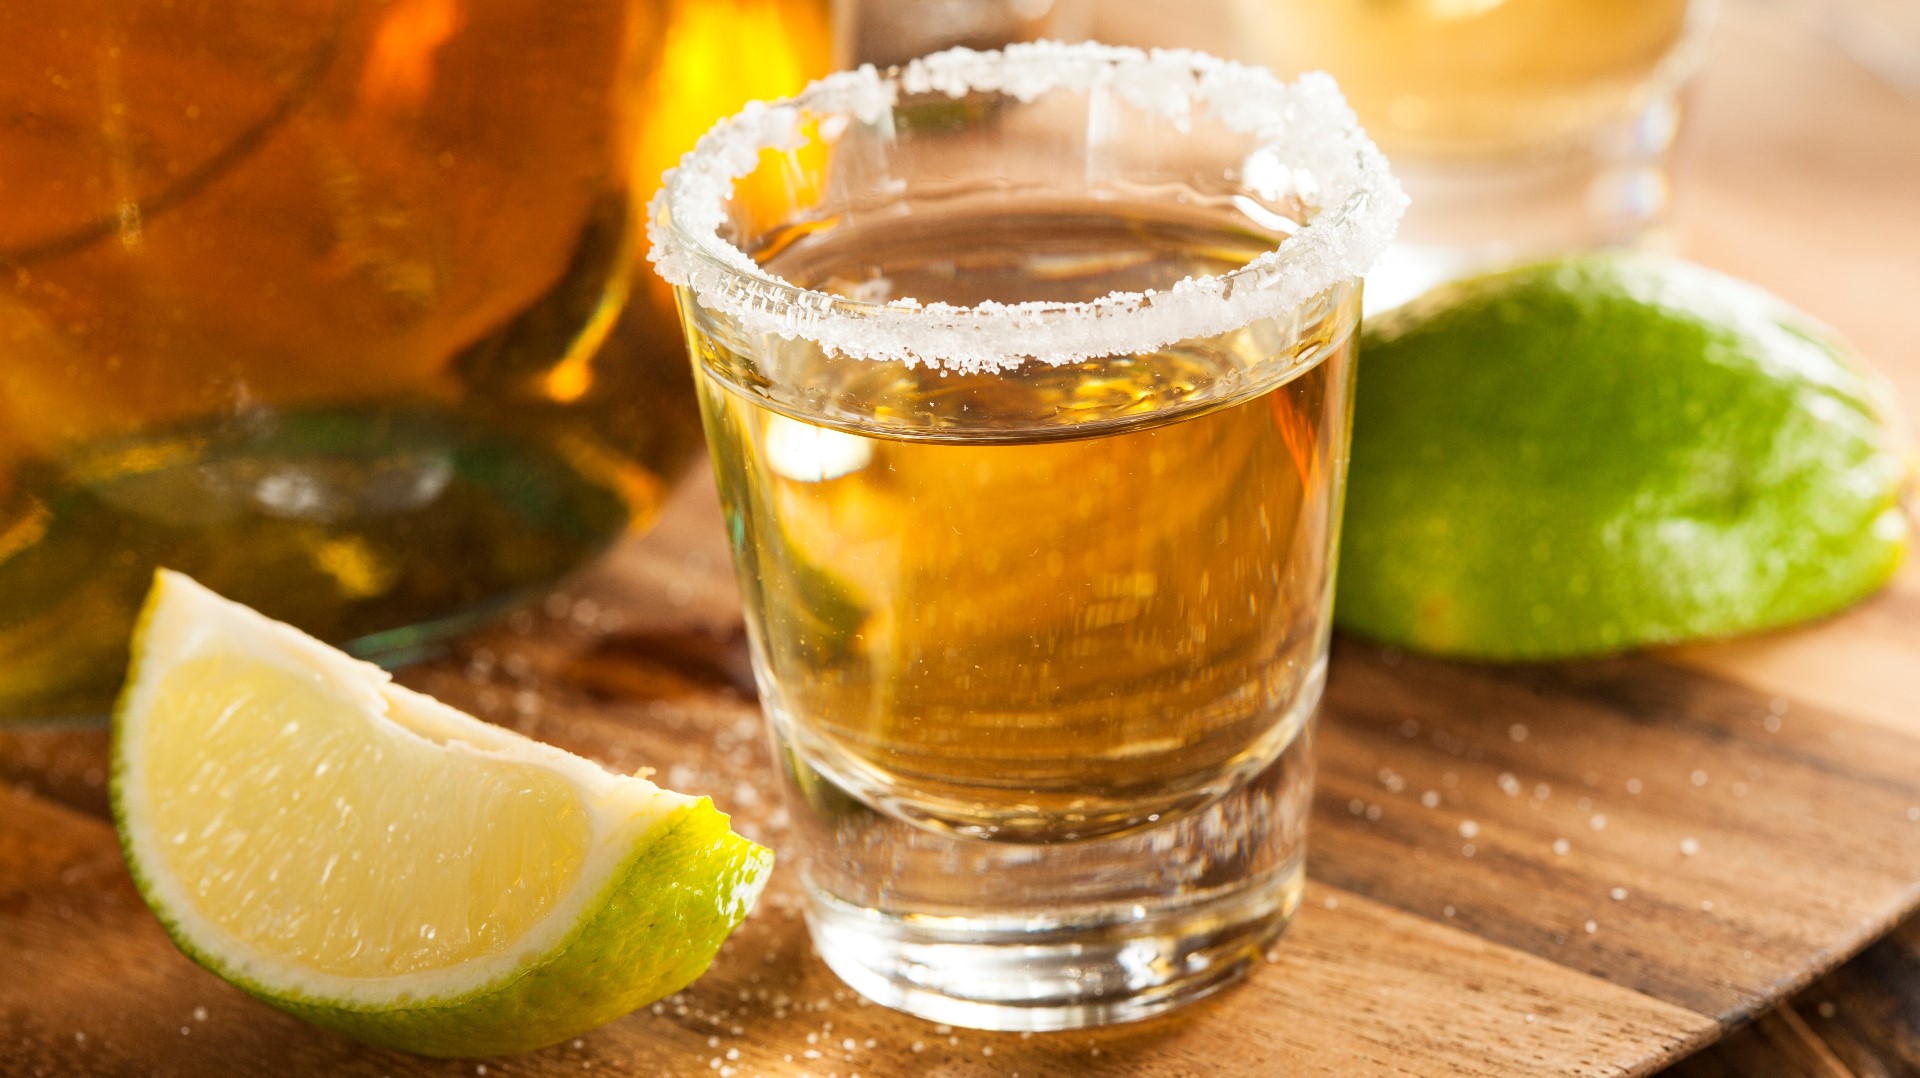 wltx.com | Is Tequila a Cure for the Common Cold?